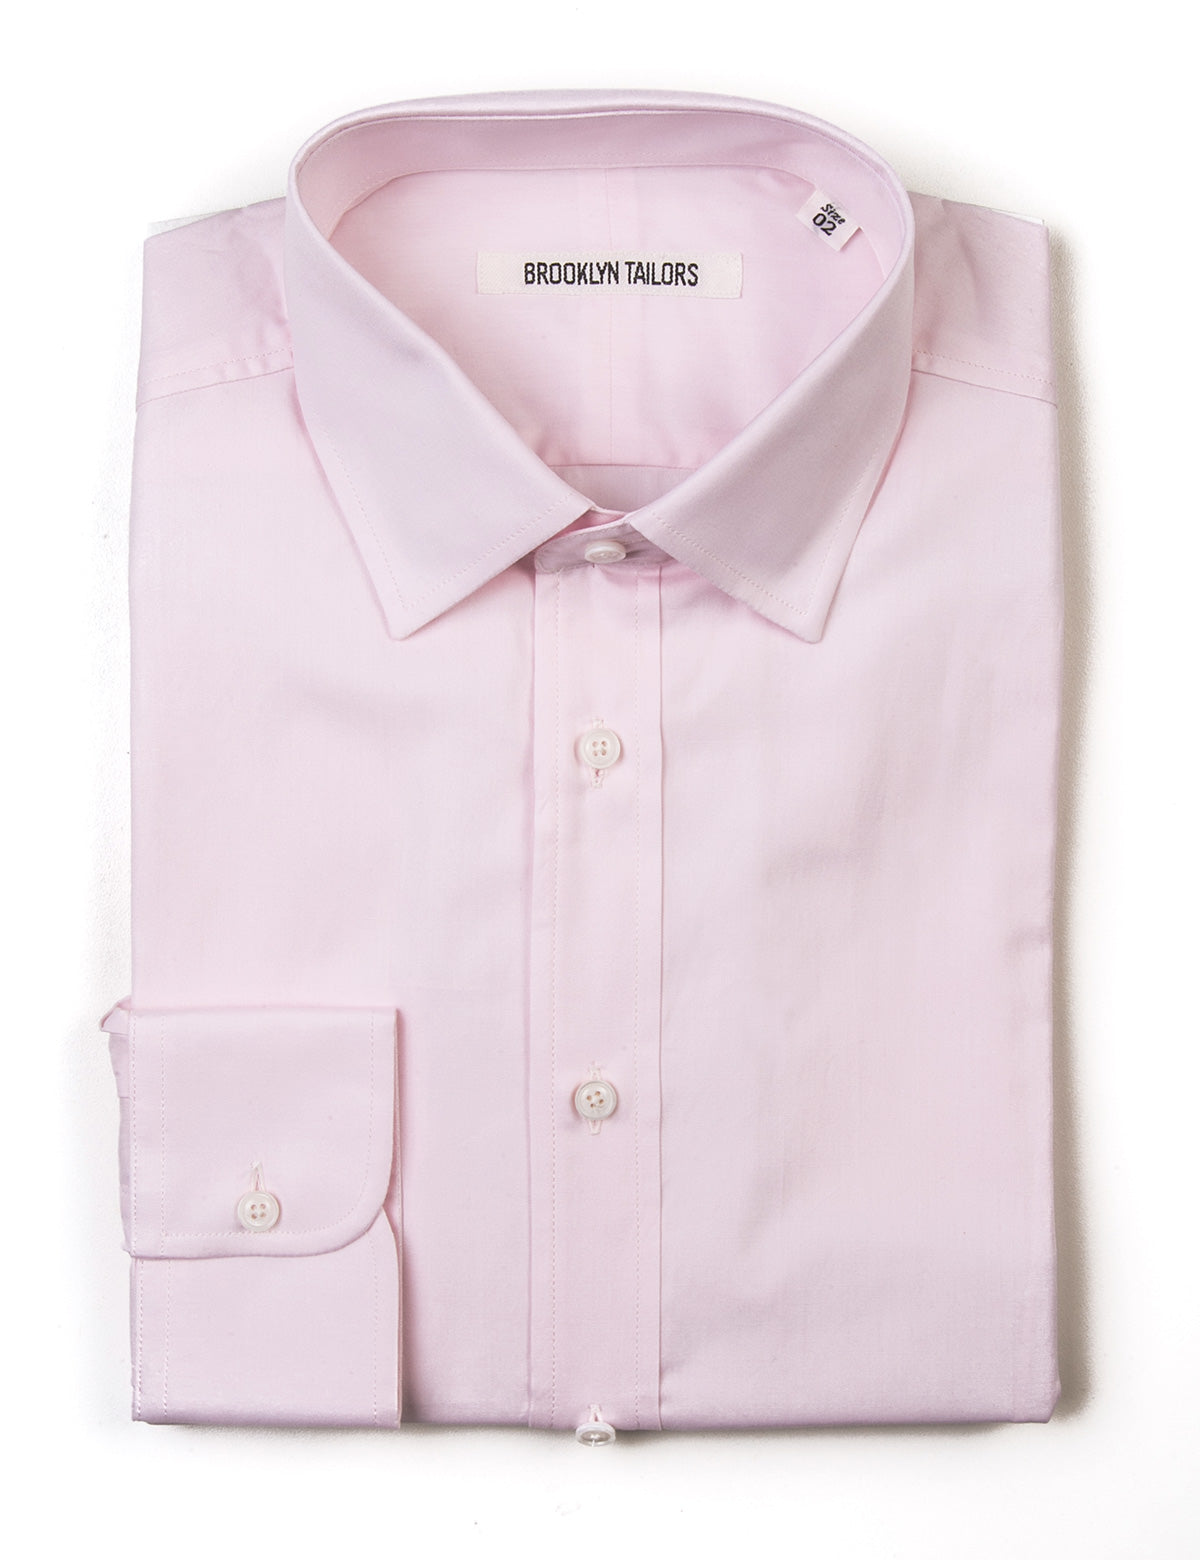 Brooklyn Tailors BKT20 Slim Dress Shirt in Pinpoint Oxford - Pale Pink folded flat shot